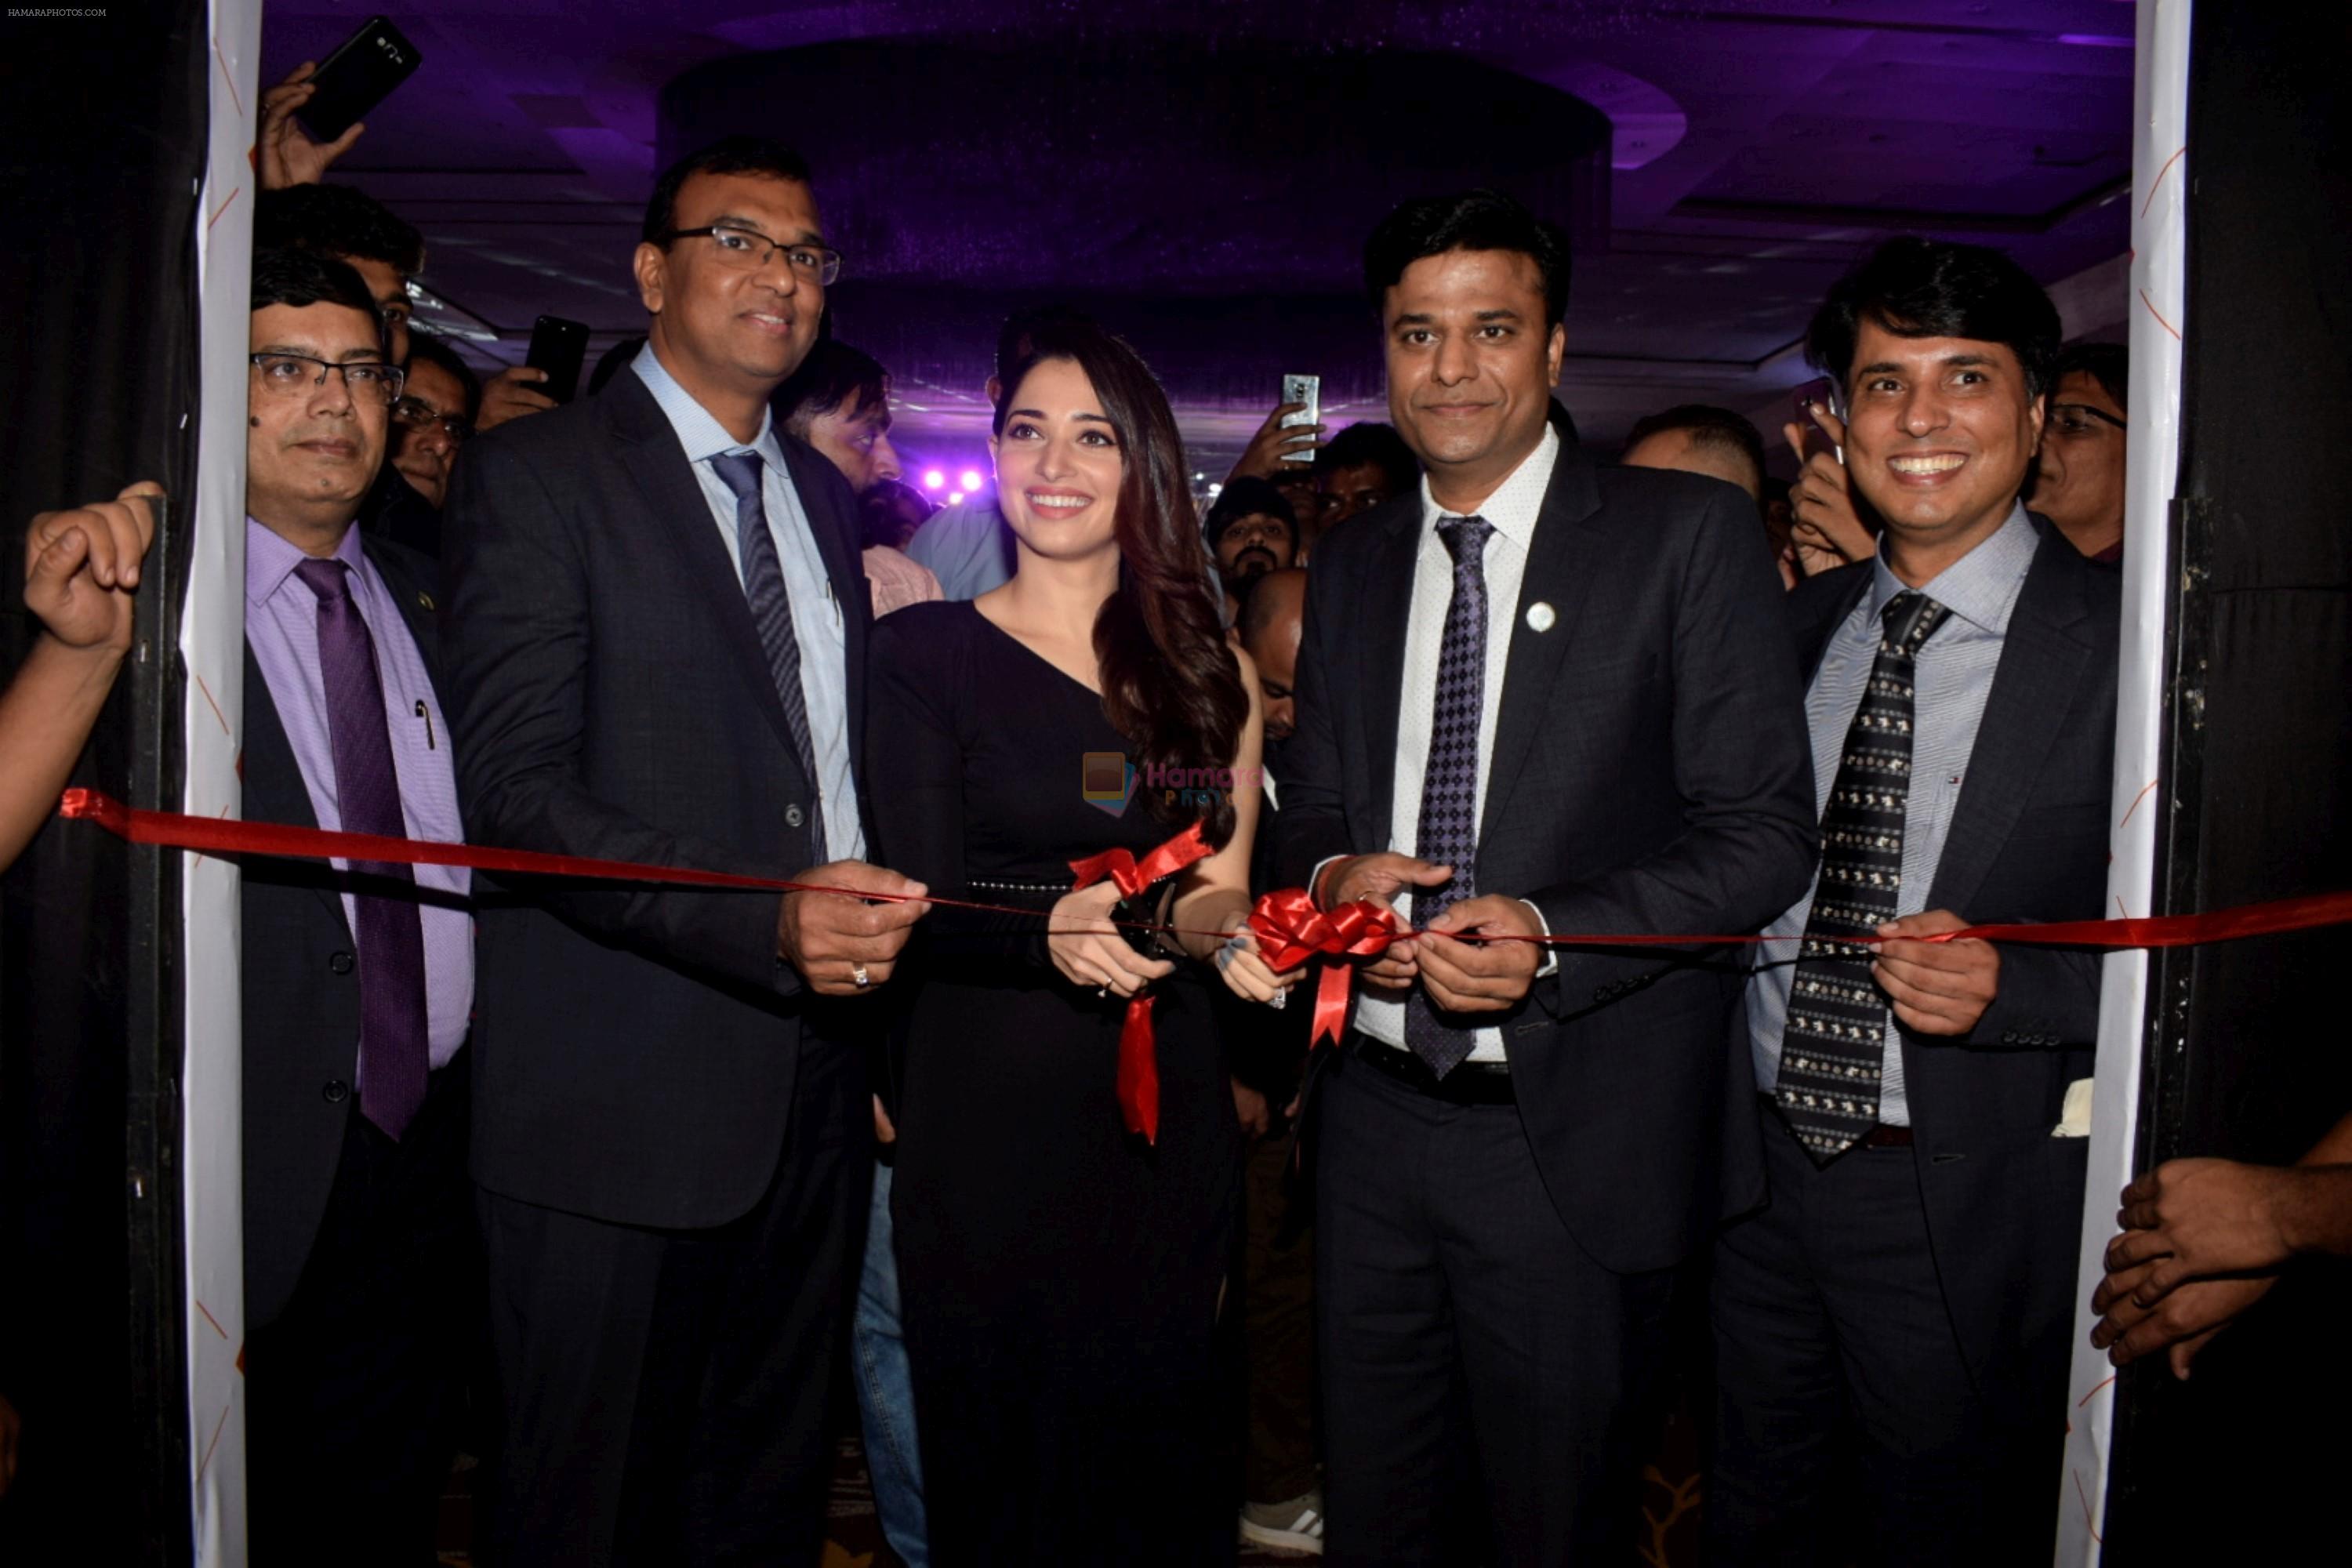 Tamanna Bhatia Unveil A New Brand From Qutone Family on 16th Sept 2018